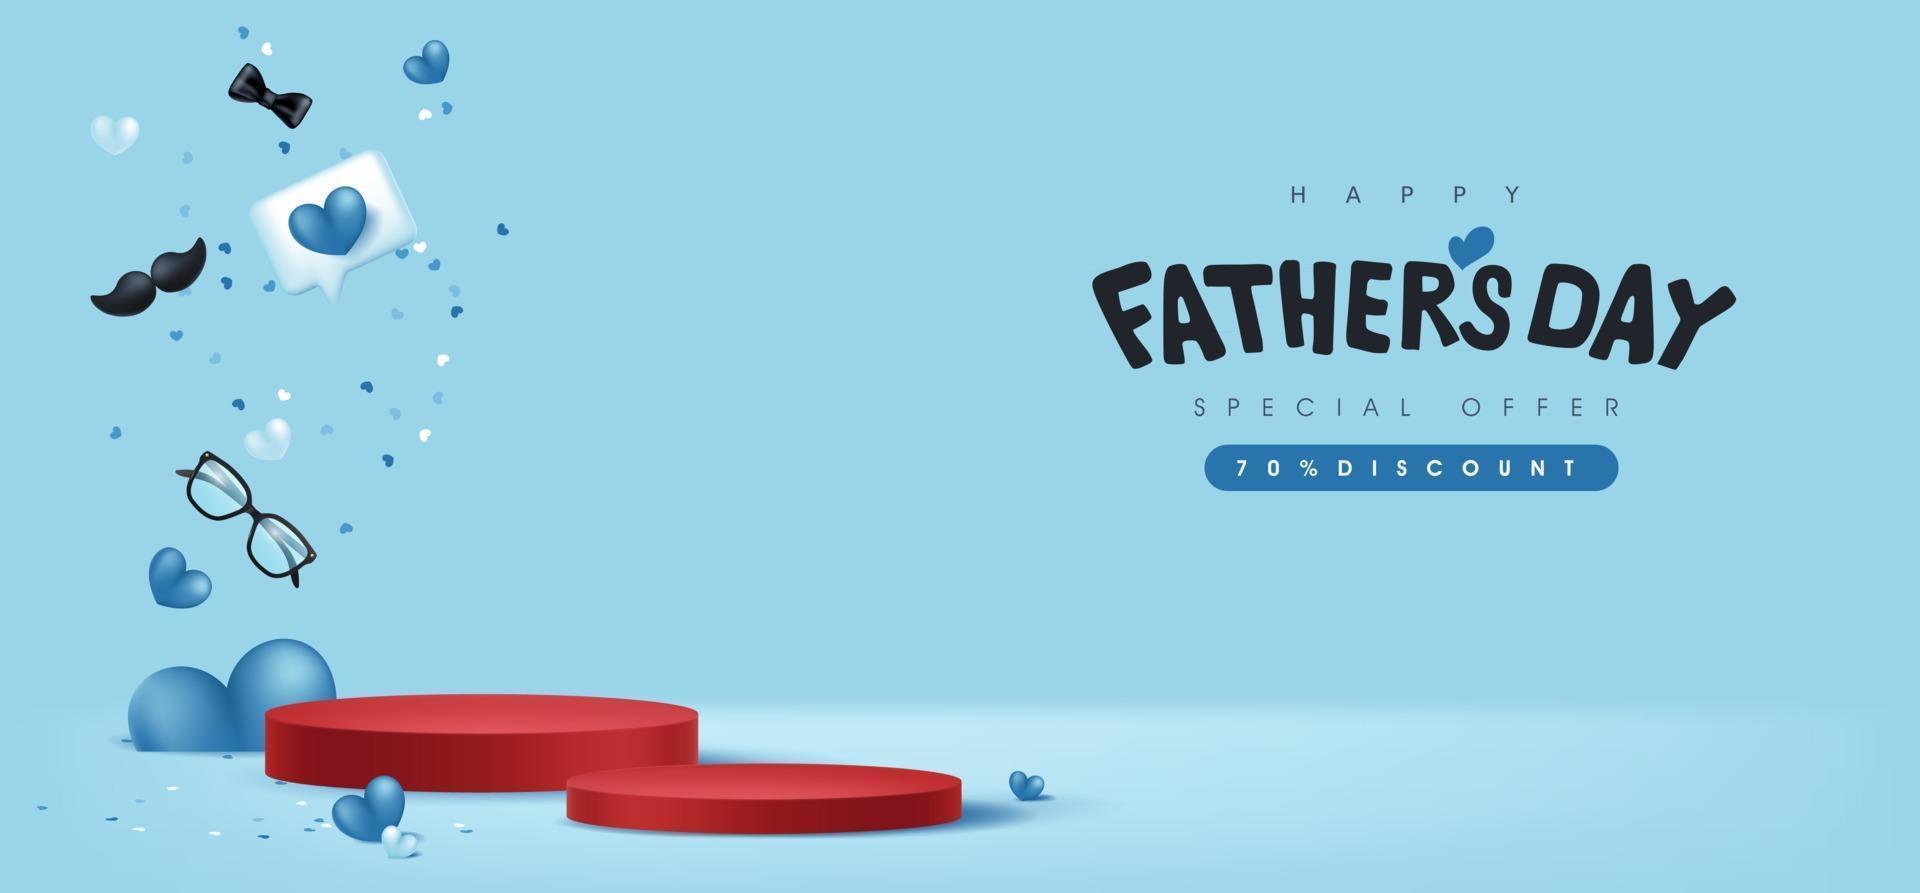 Fathers Day card with gift box for dad on blue background vector